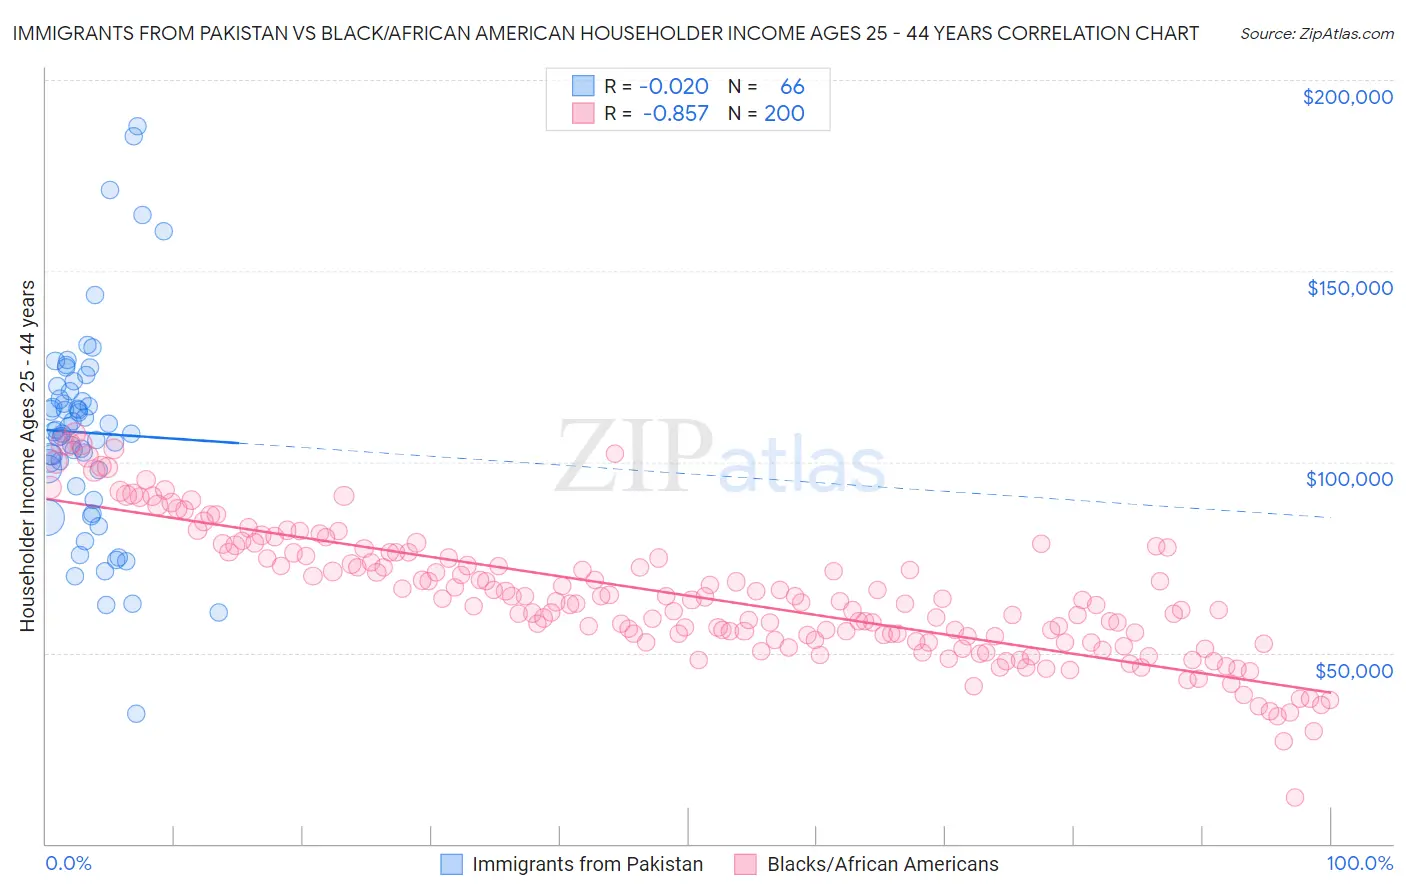 Immigrants from Pakistan vs Black/African American Householder Income Ages 25 - 44 years